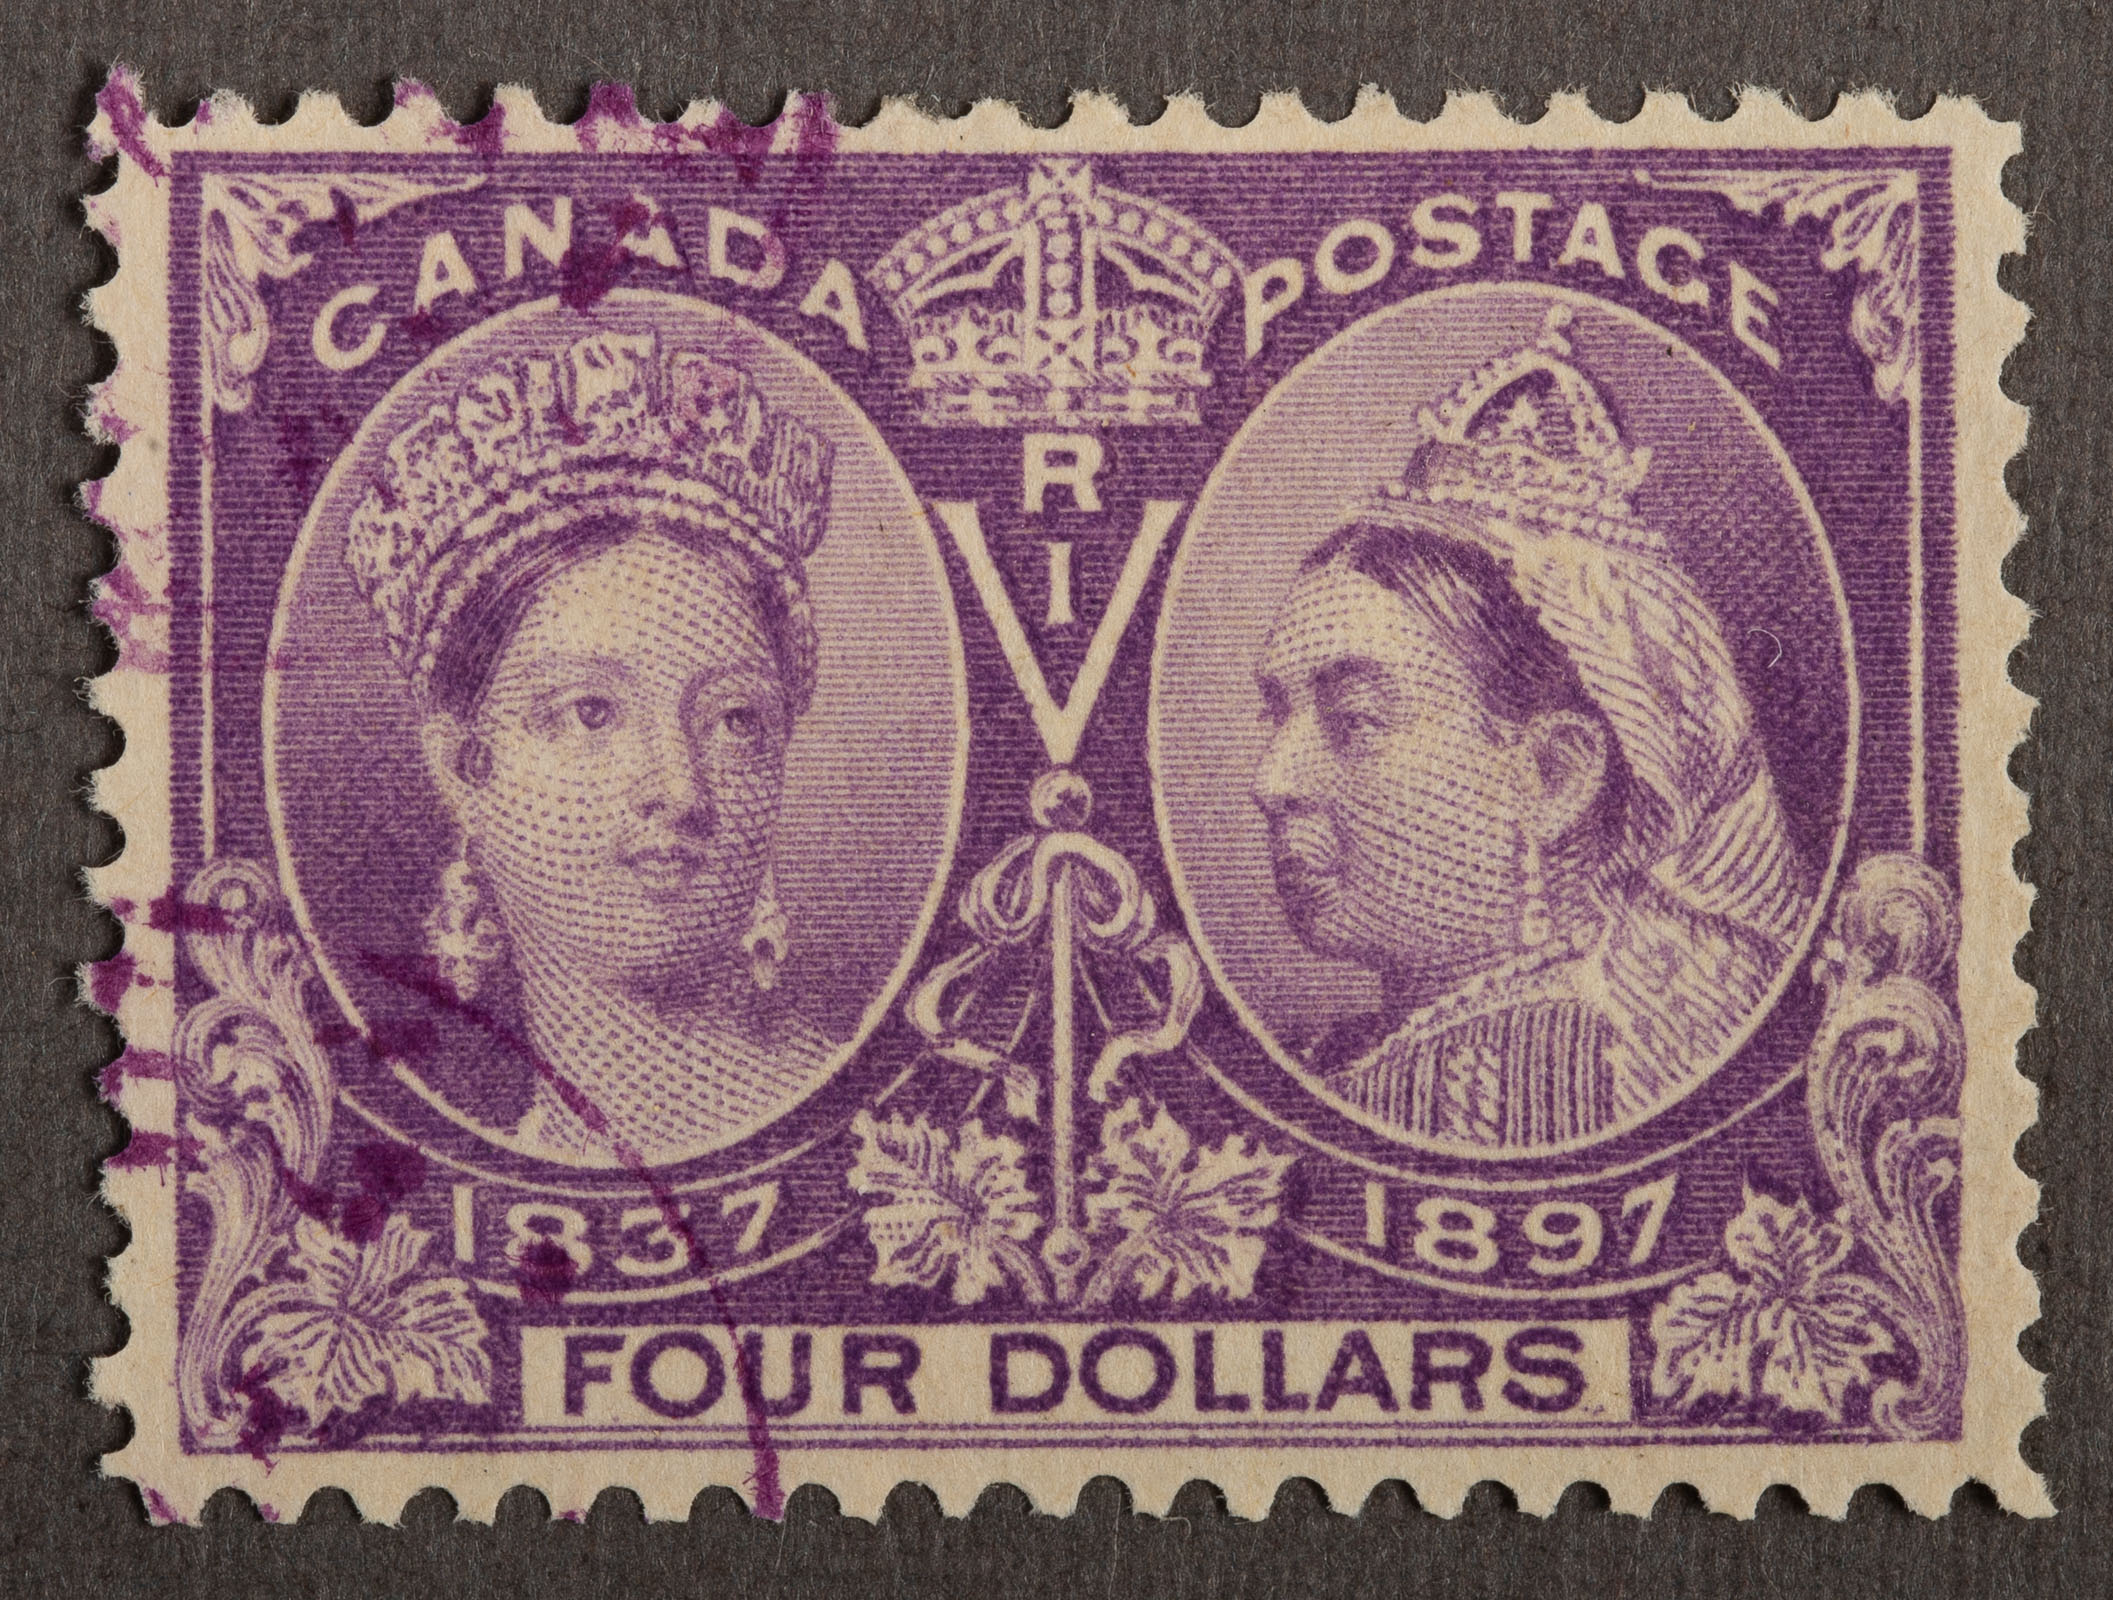 CANADA 4 POSTAGE STAMP 1897 338a0a